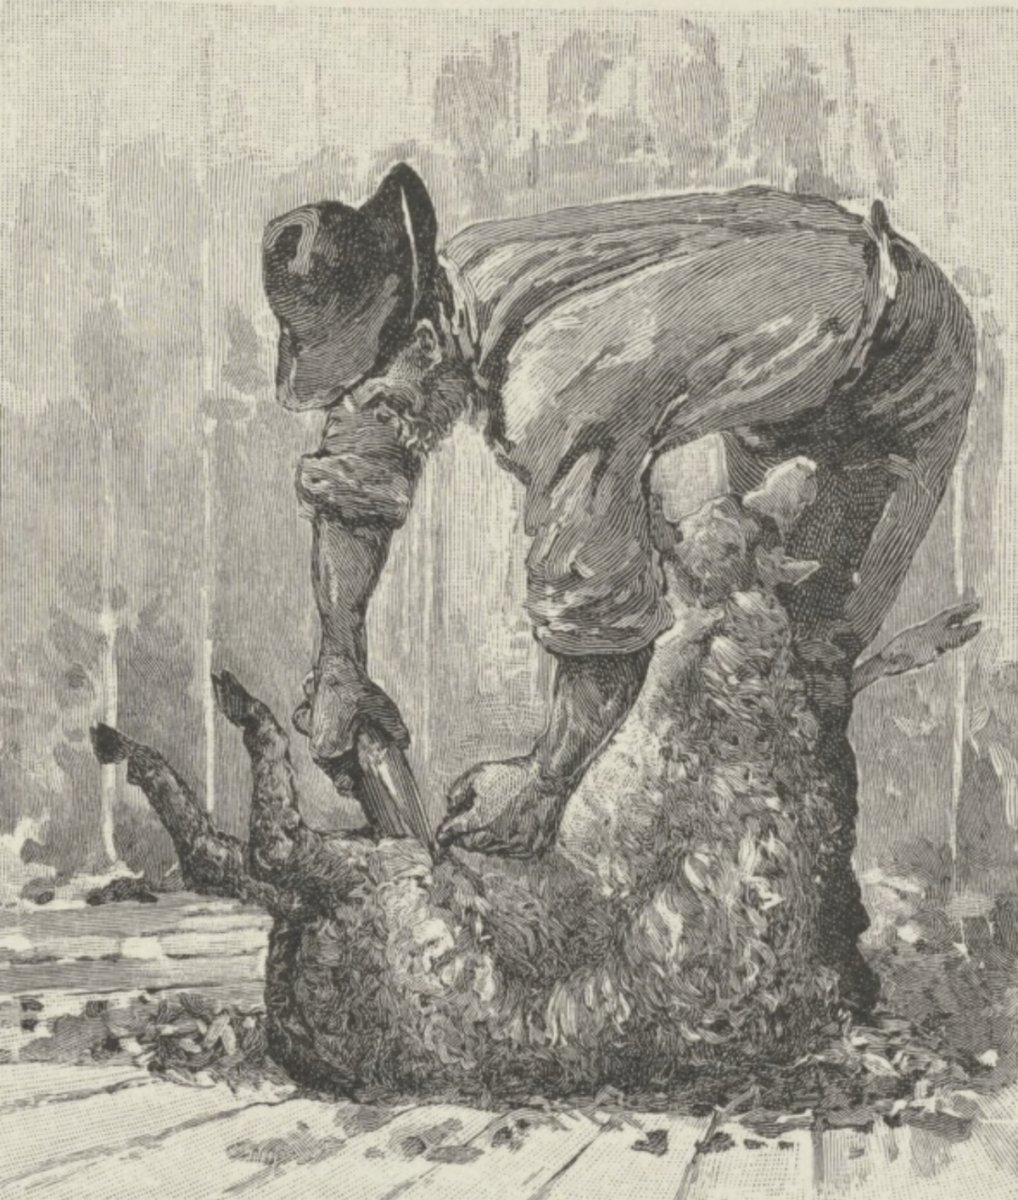 Sheep-shearing from the Picturesque Atlas of Australasia